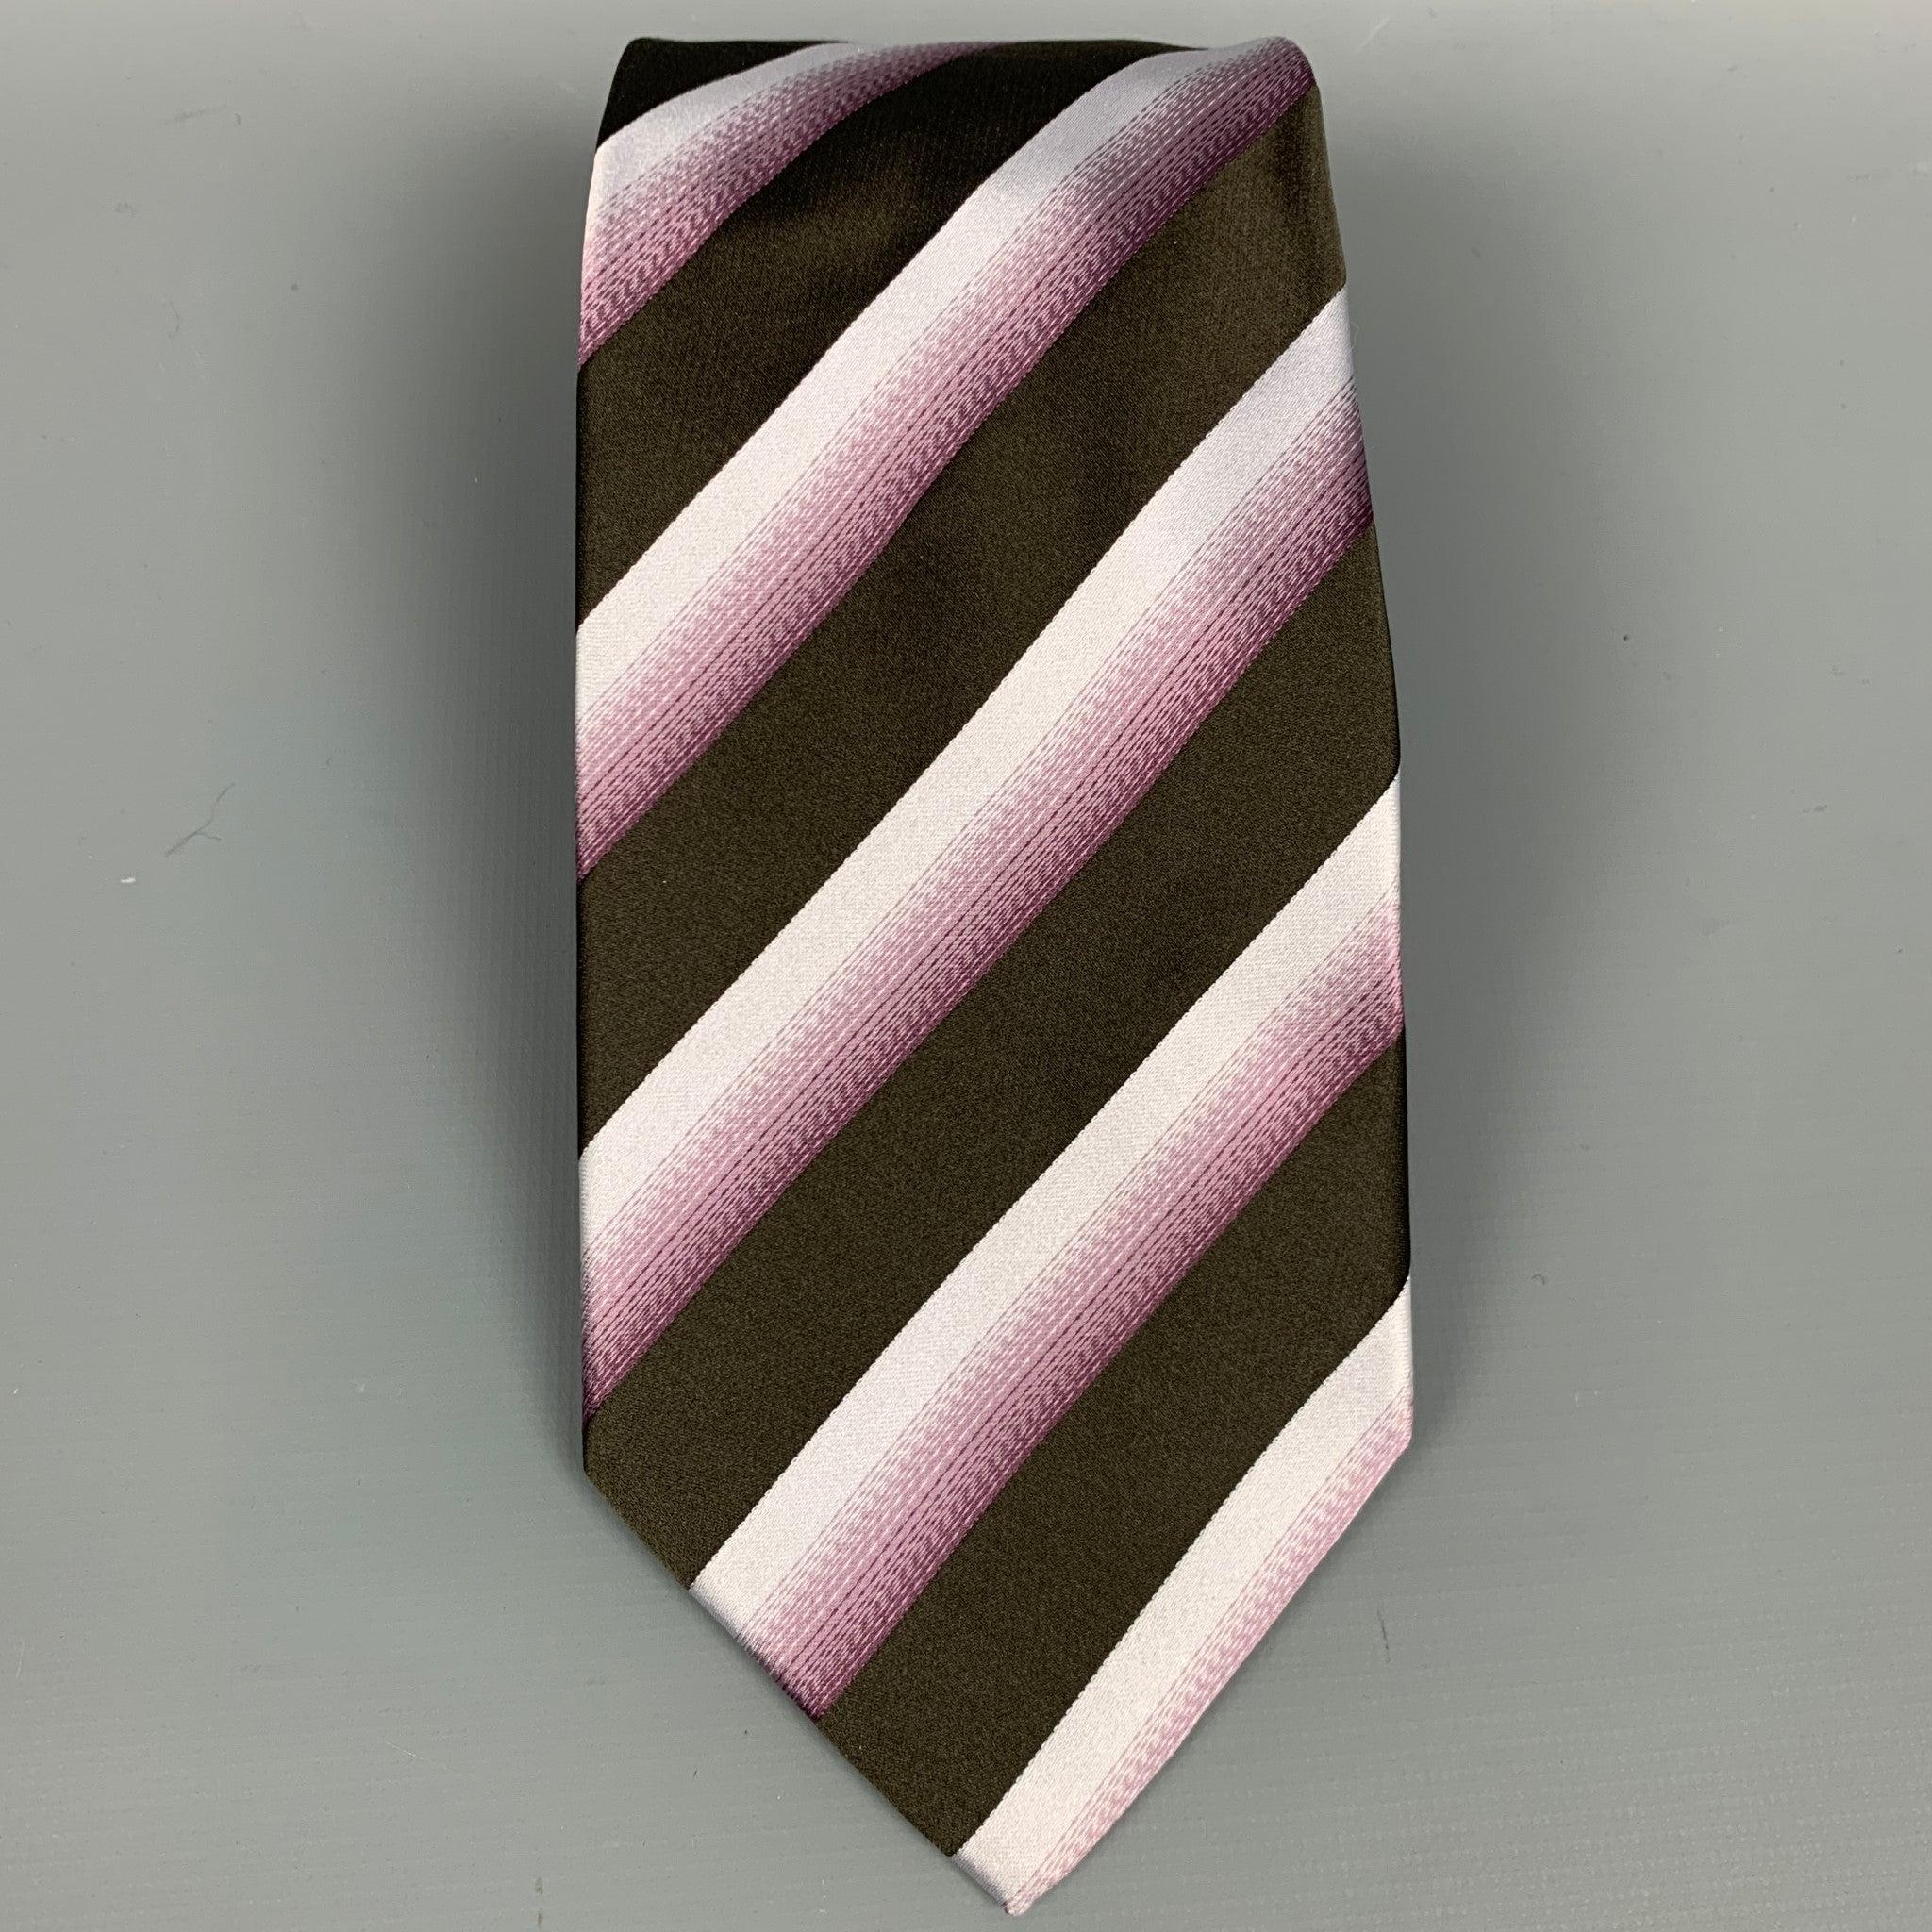 GIORGIO ARMAN neck tie comes in a brown & purple diagonal stipe silk. Made in Italy.Very Good Pre-Owned Condition. 

Measurements: 
  Width: 3.75 inches  
  
  
 
Reference: 82199
Category: Tie
More Details
    
Brand:  GIORGIO ARMANI
Color:  Brown